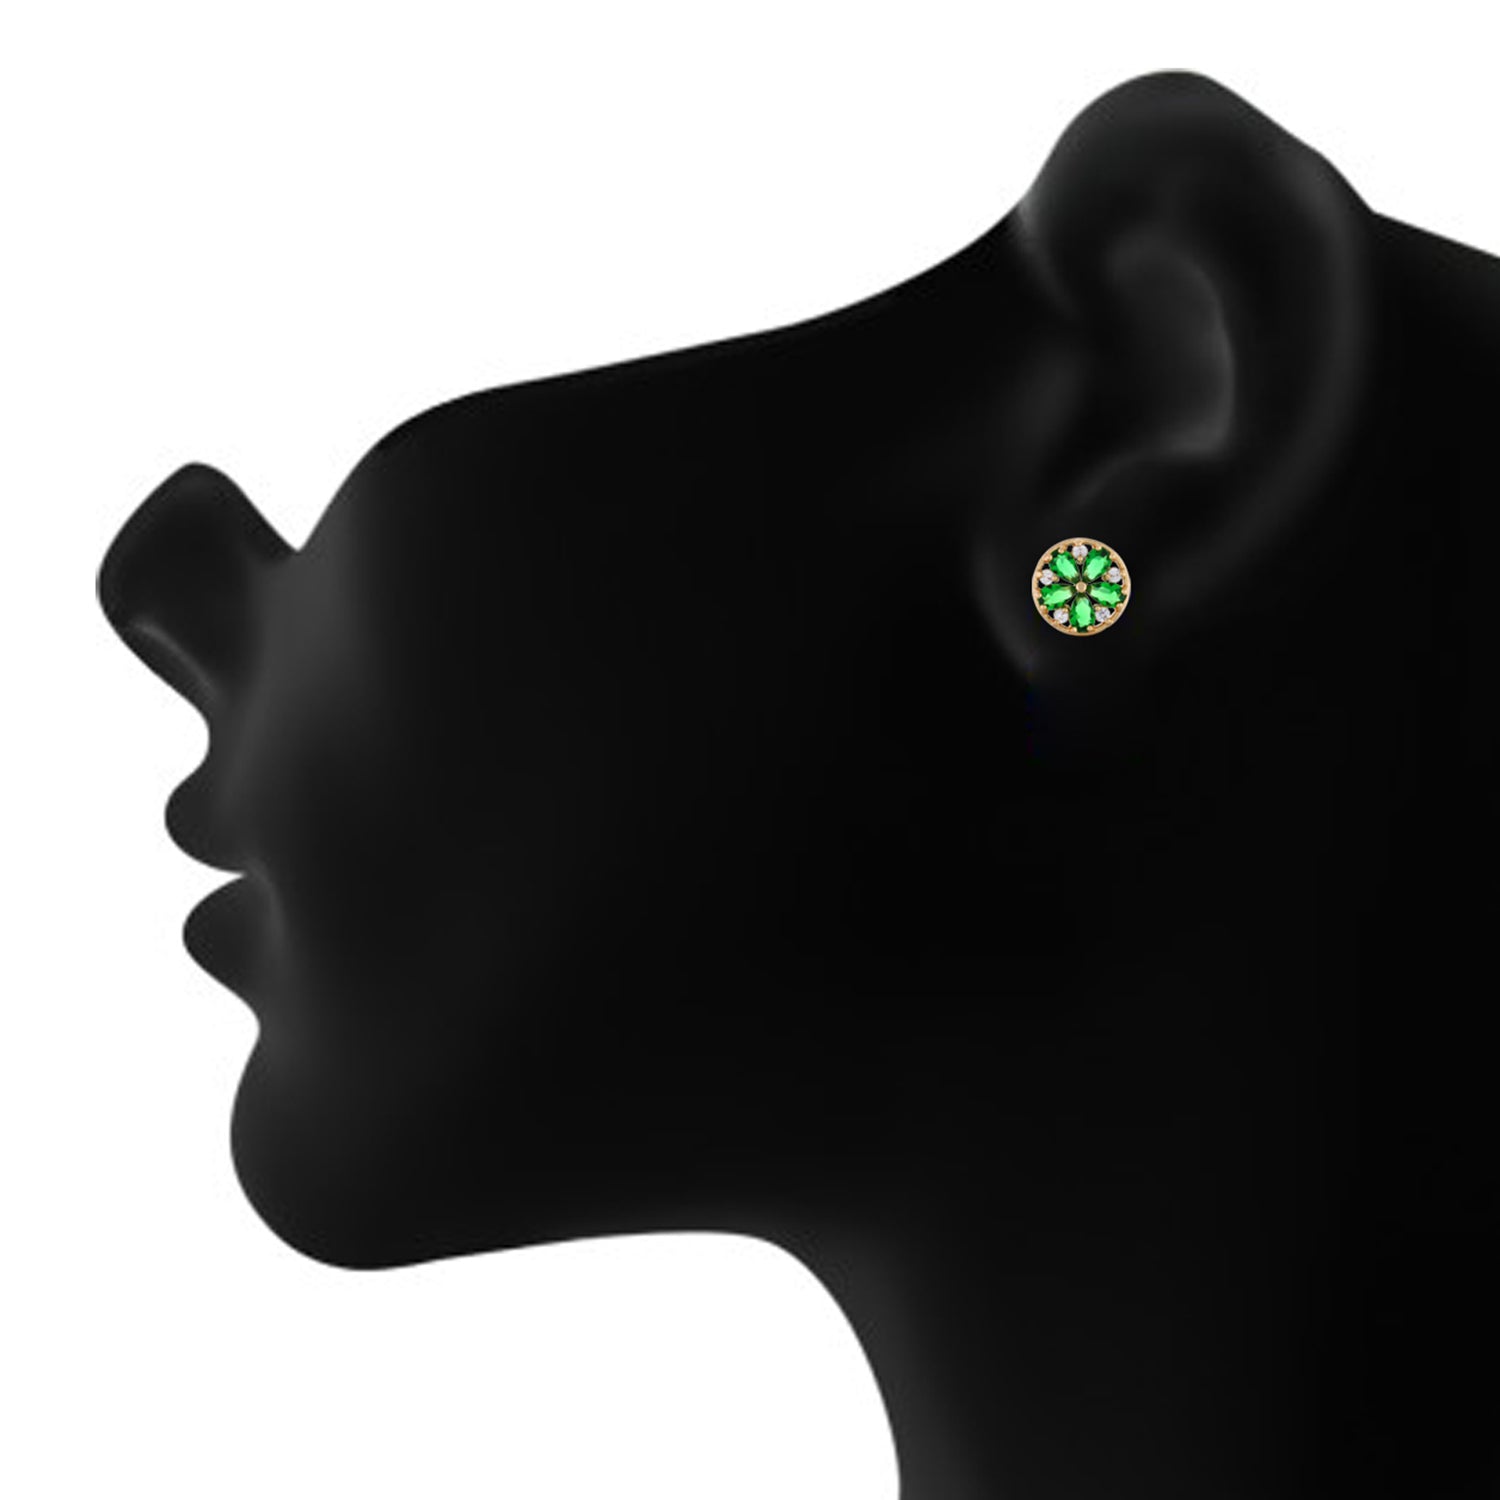 Green colour Round Design  Stud Earrings for Girls and Women